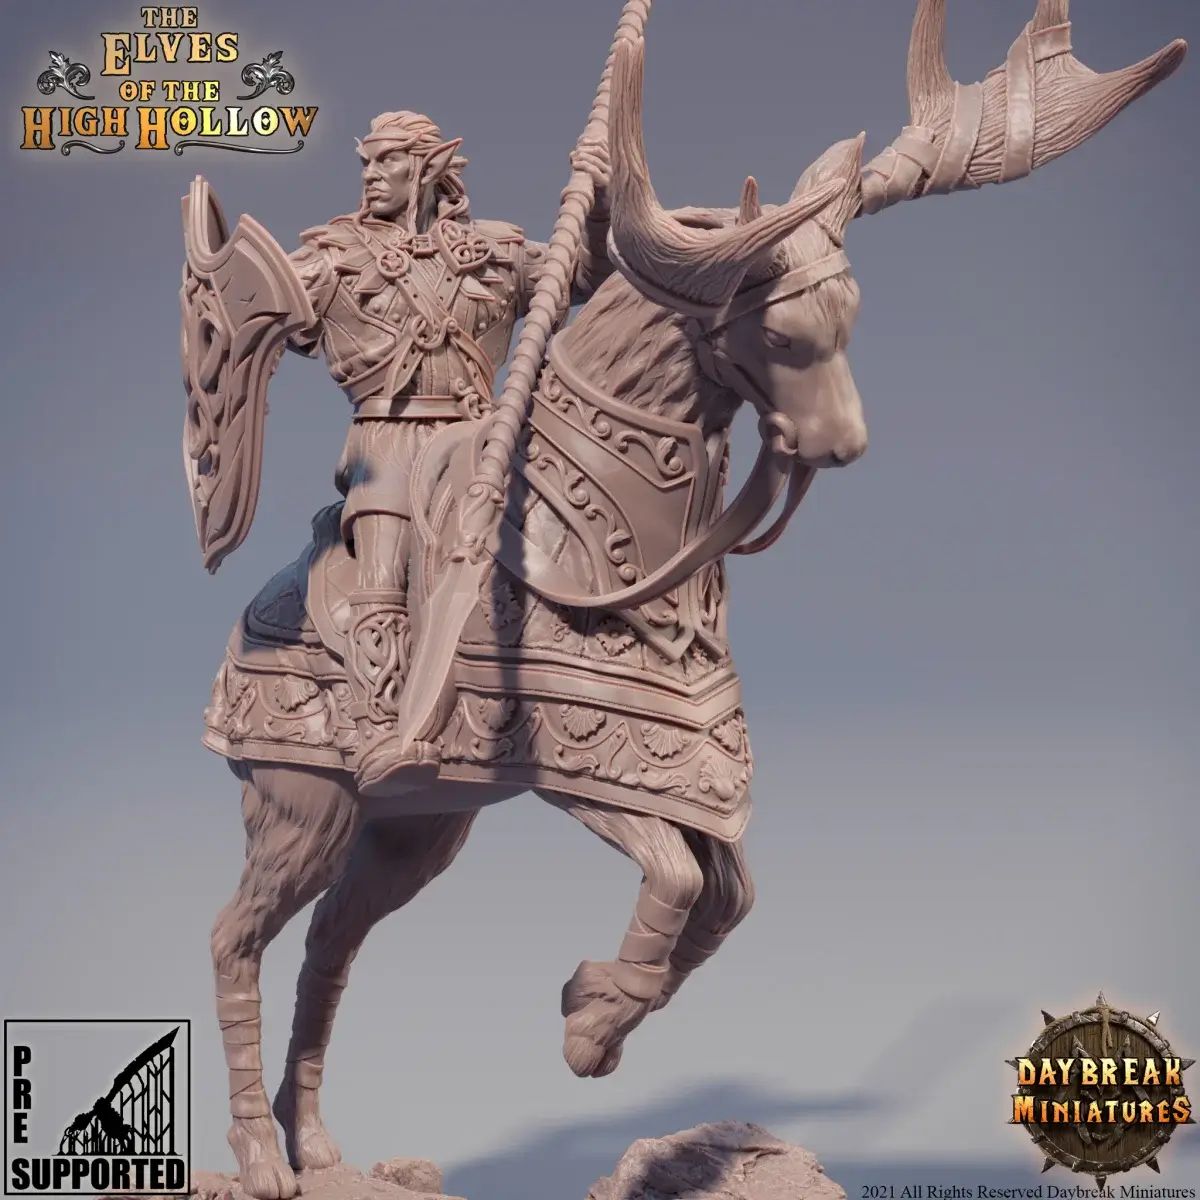 Glaive, son of Faeren | The Elves of the High Hollow | Daybreak Miniatures 32mm